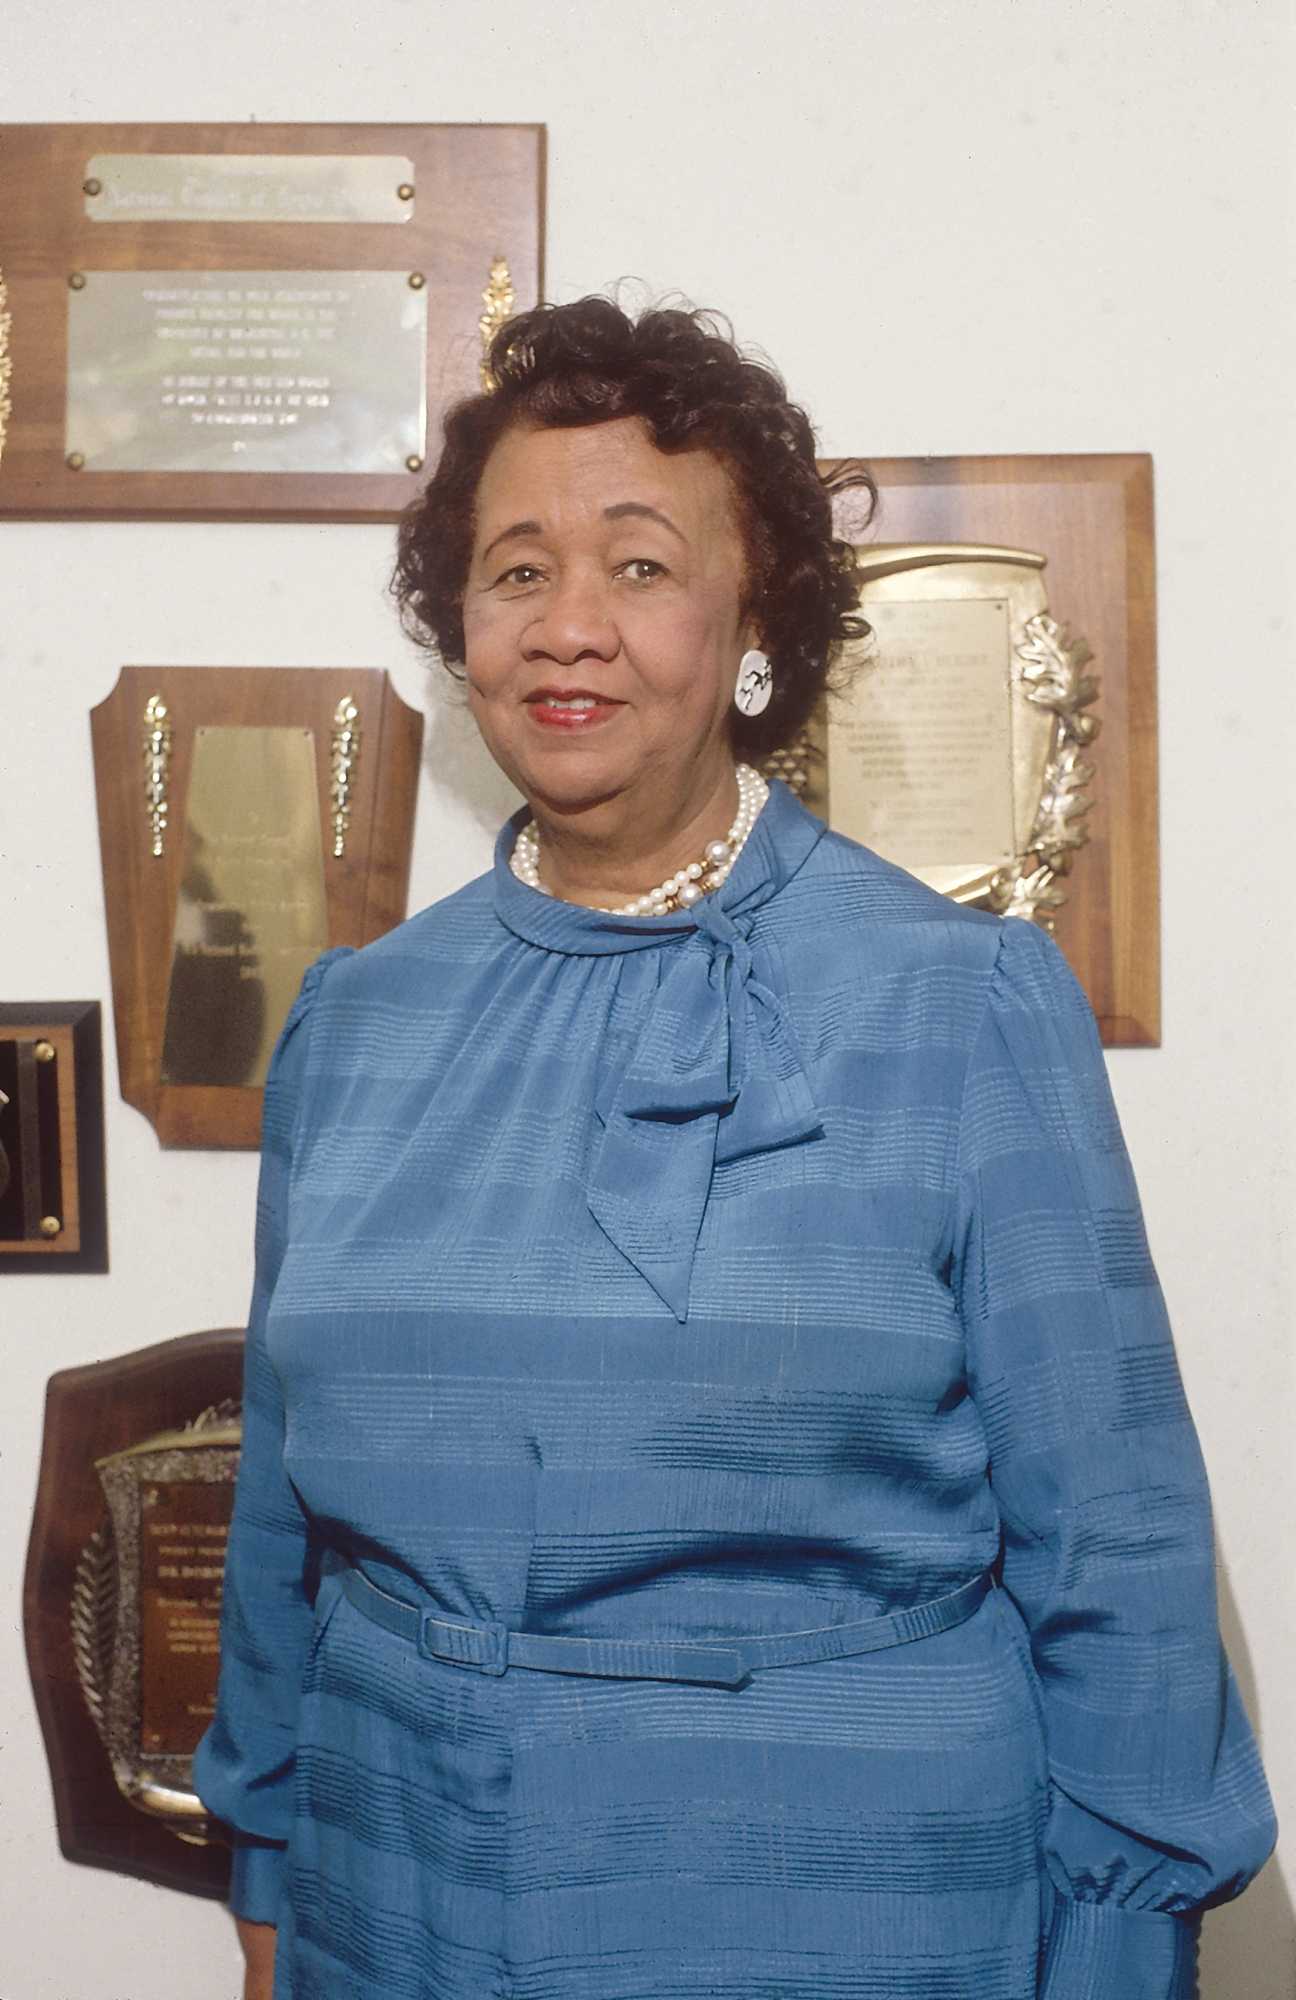 Photograph of Dr. Dorothy Height stands in front of wall plaques